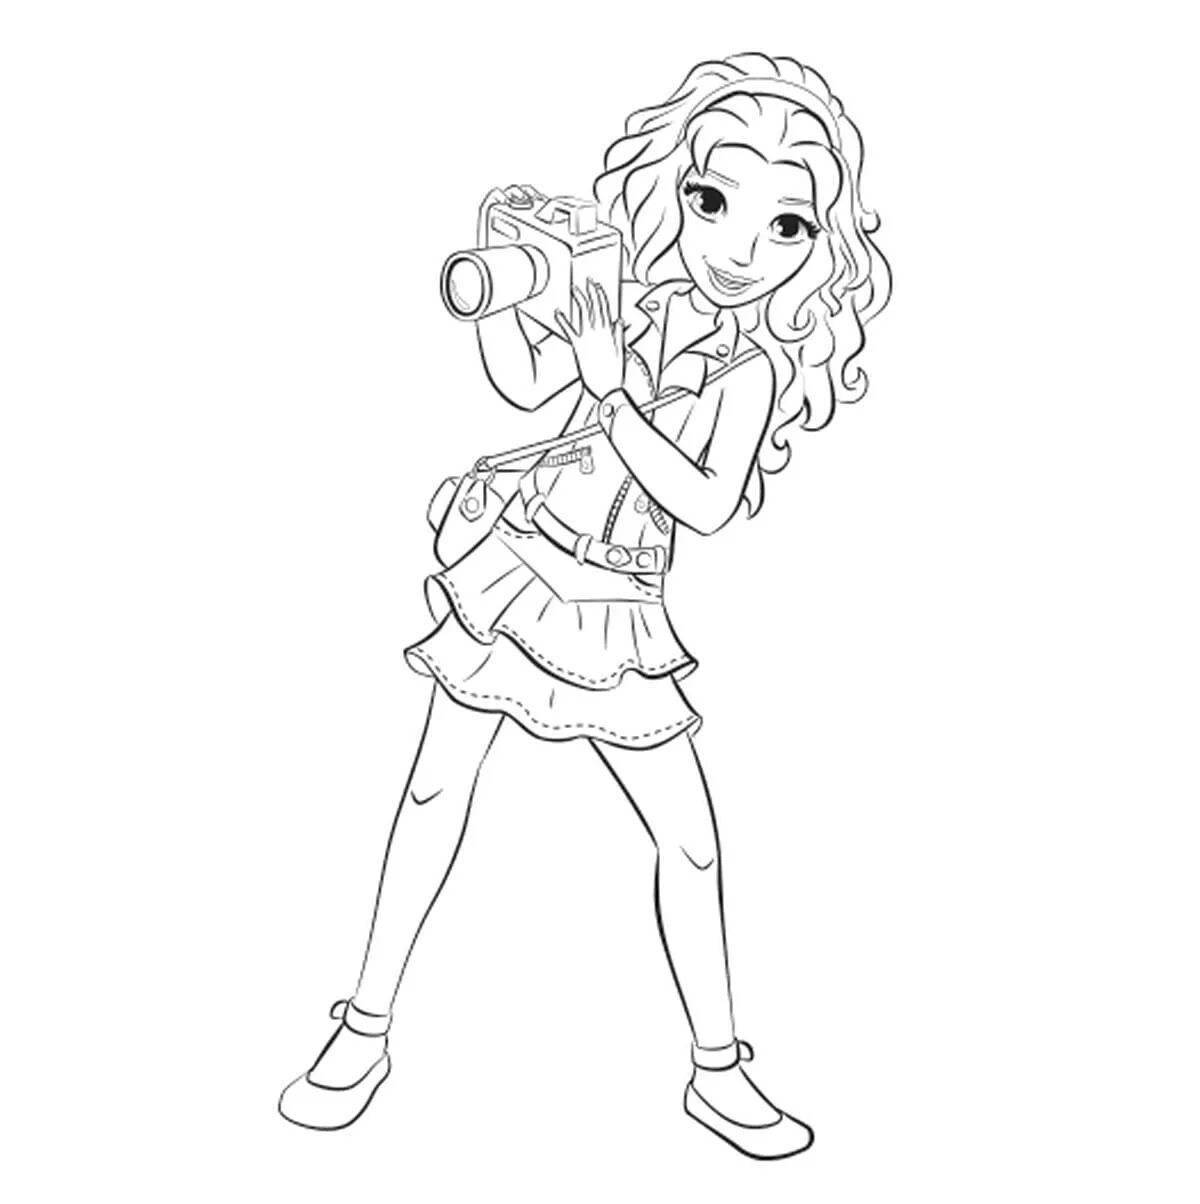 Charming emma coloring page